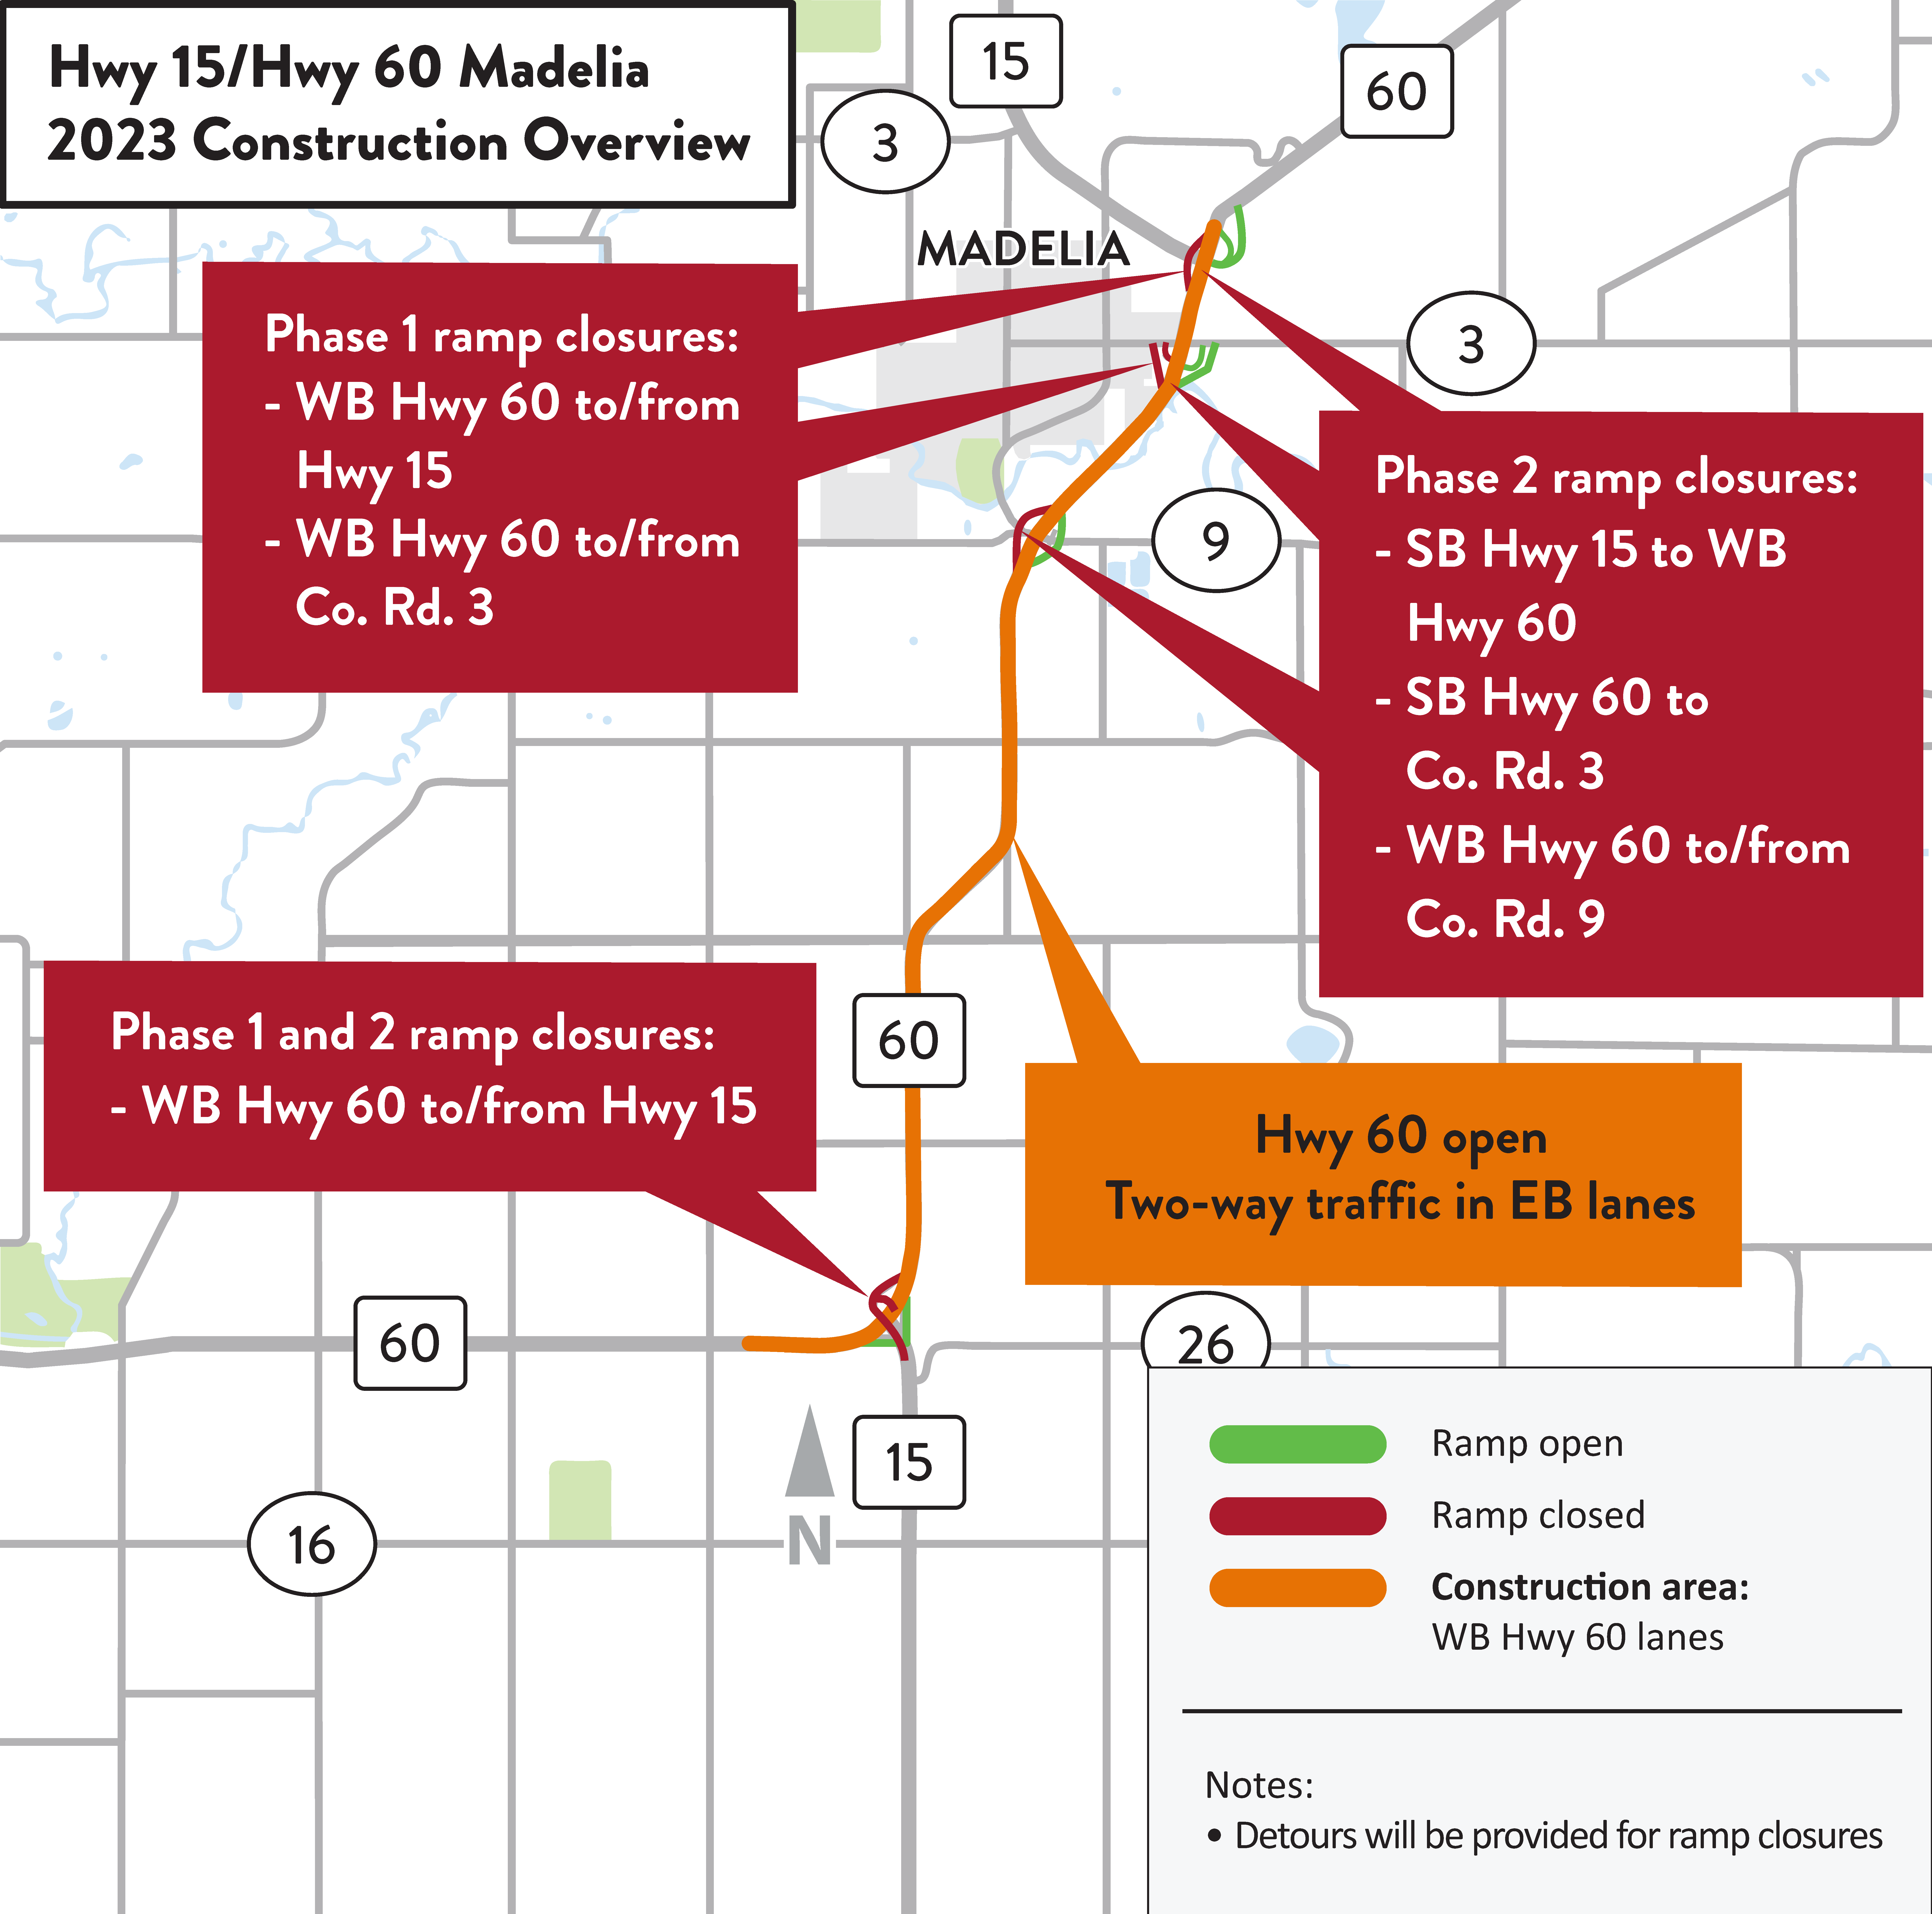 Hwy 15/Hwy 60 construction overview